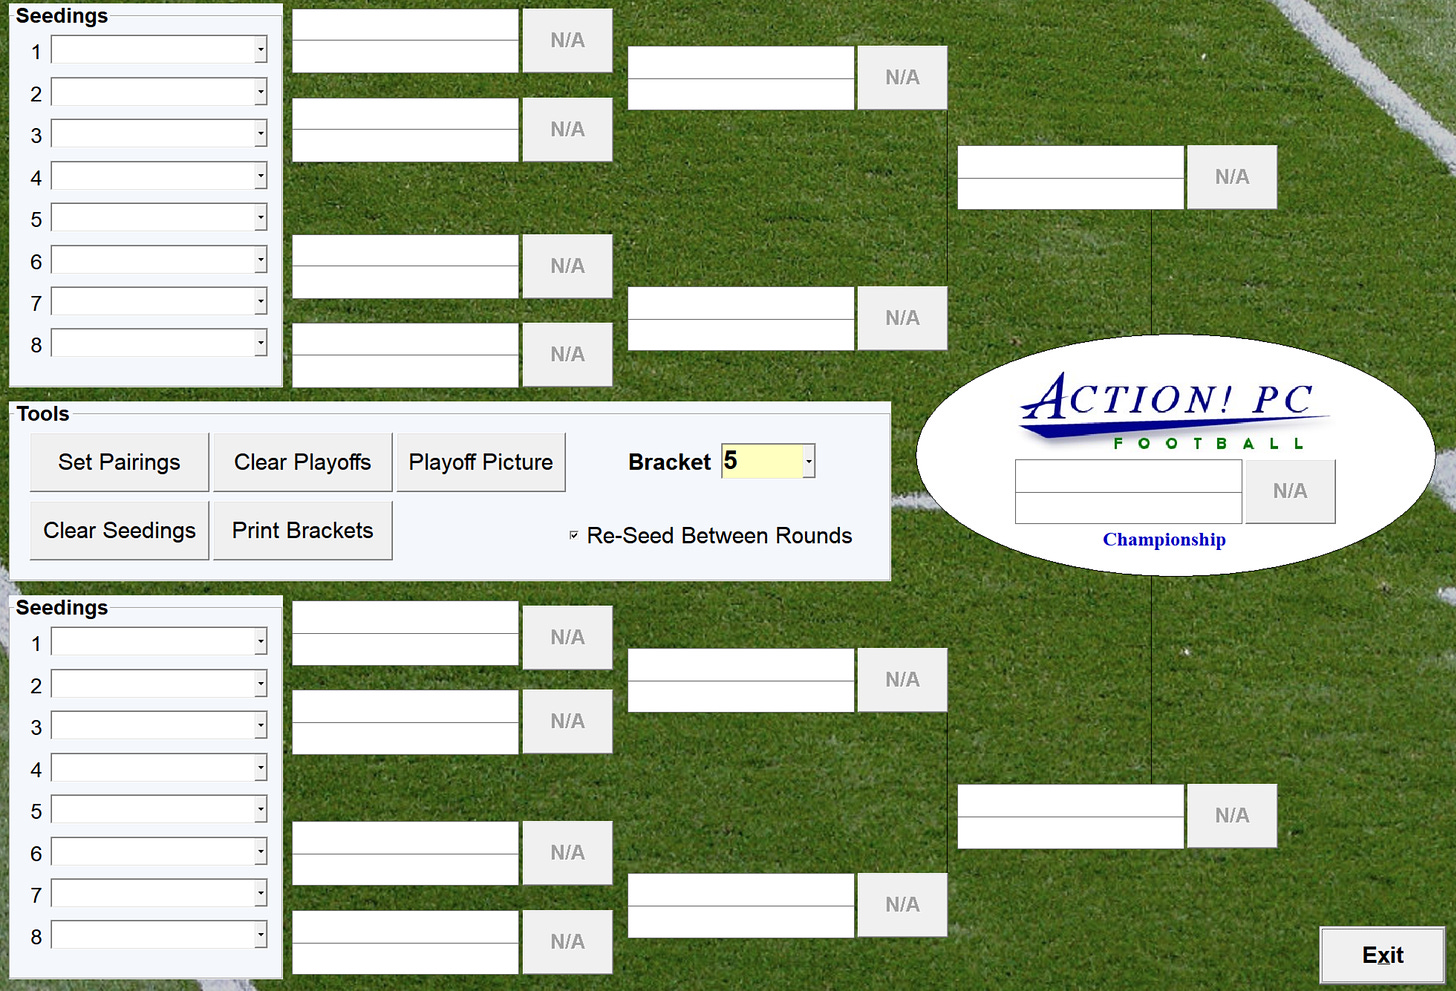 Action PC Football Playoff Window Tournament